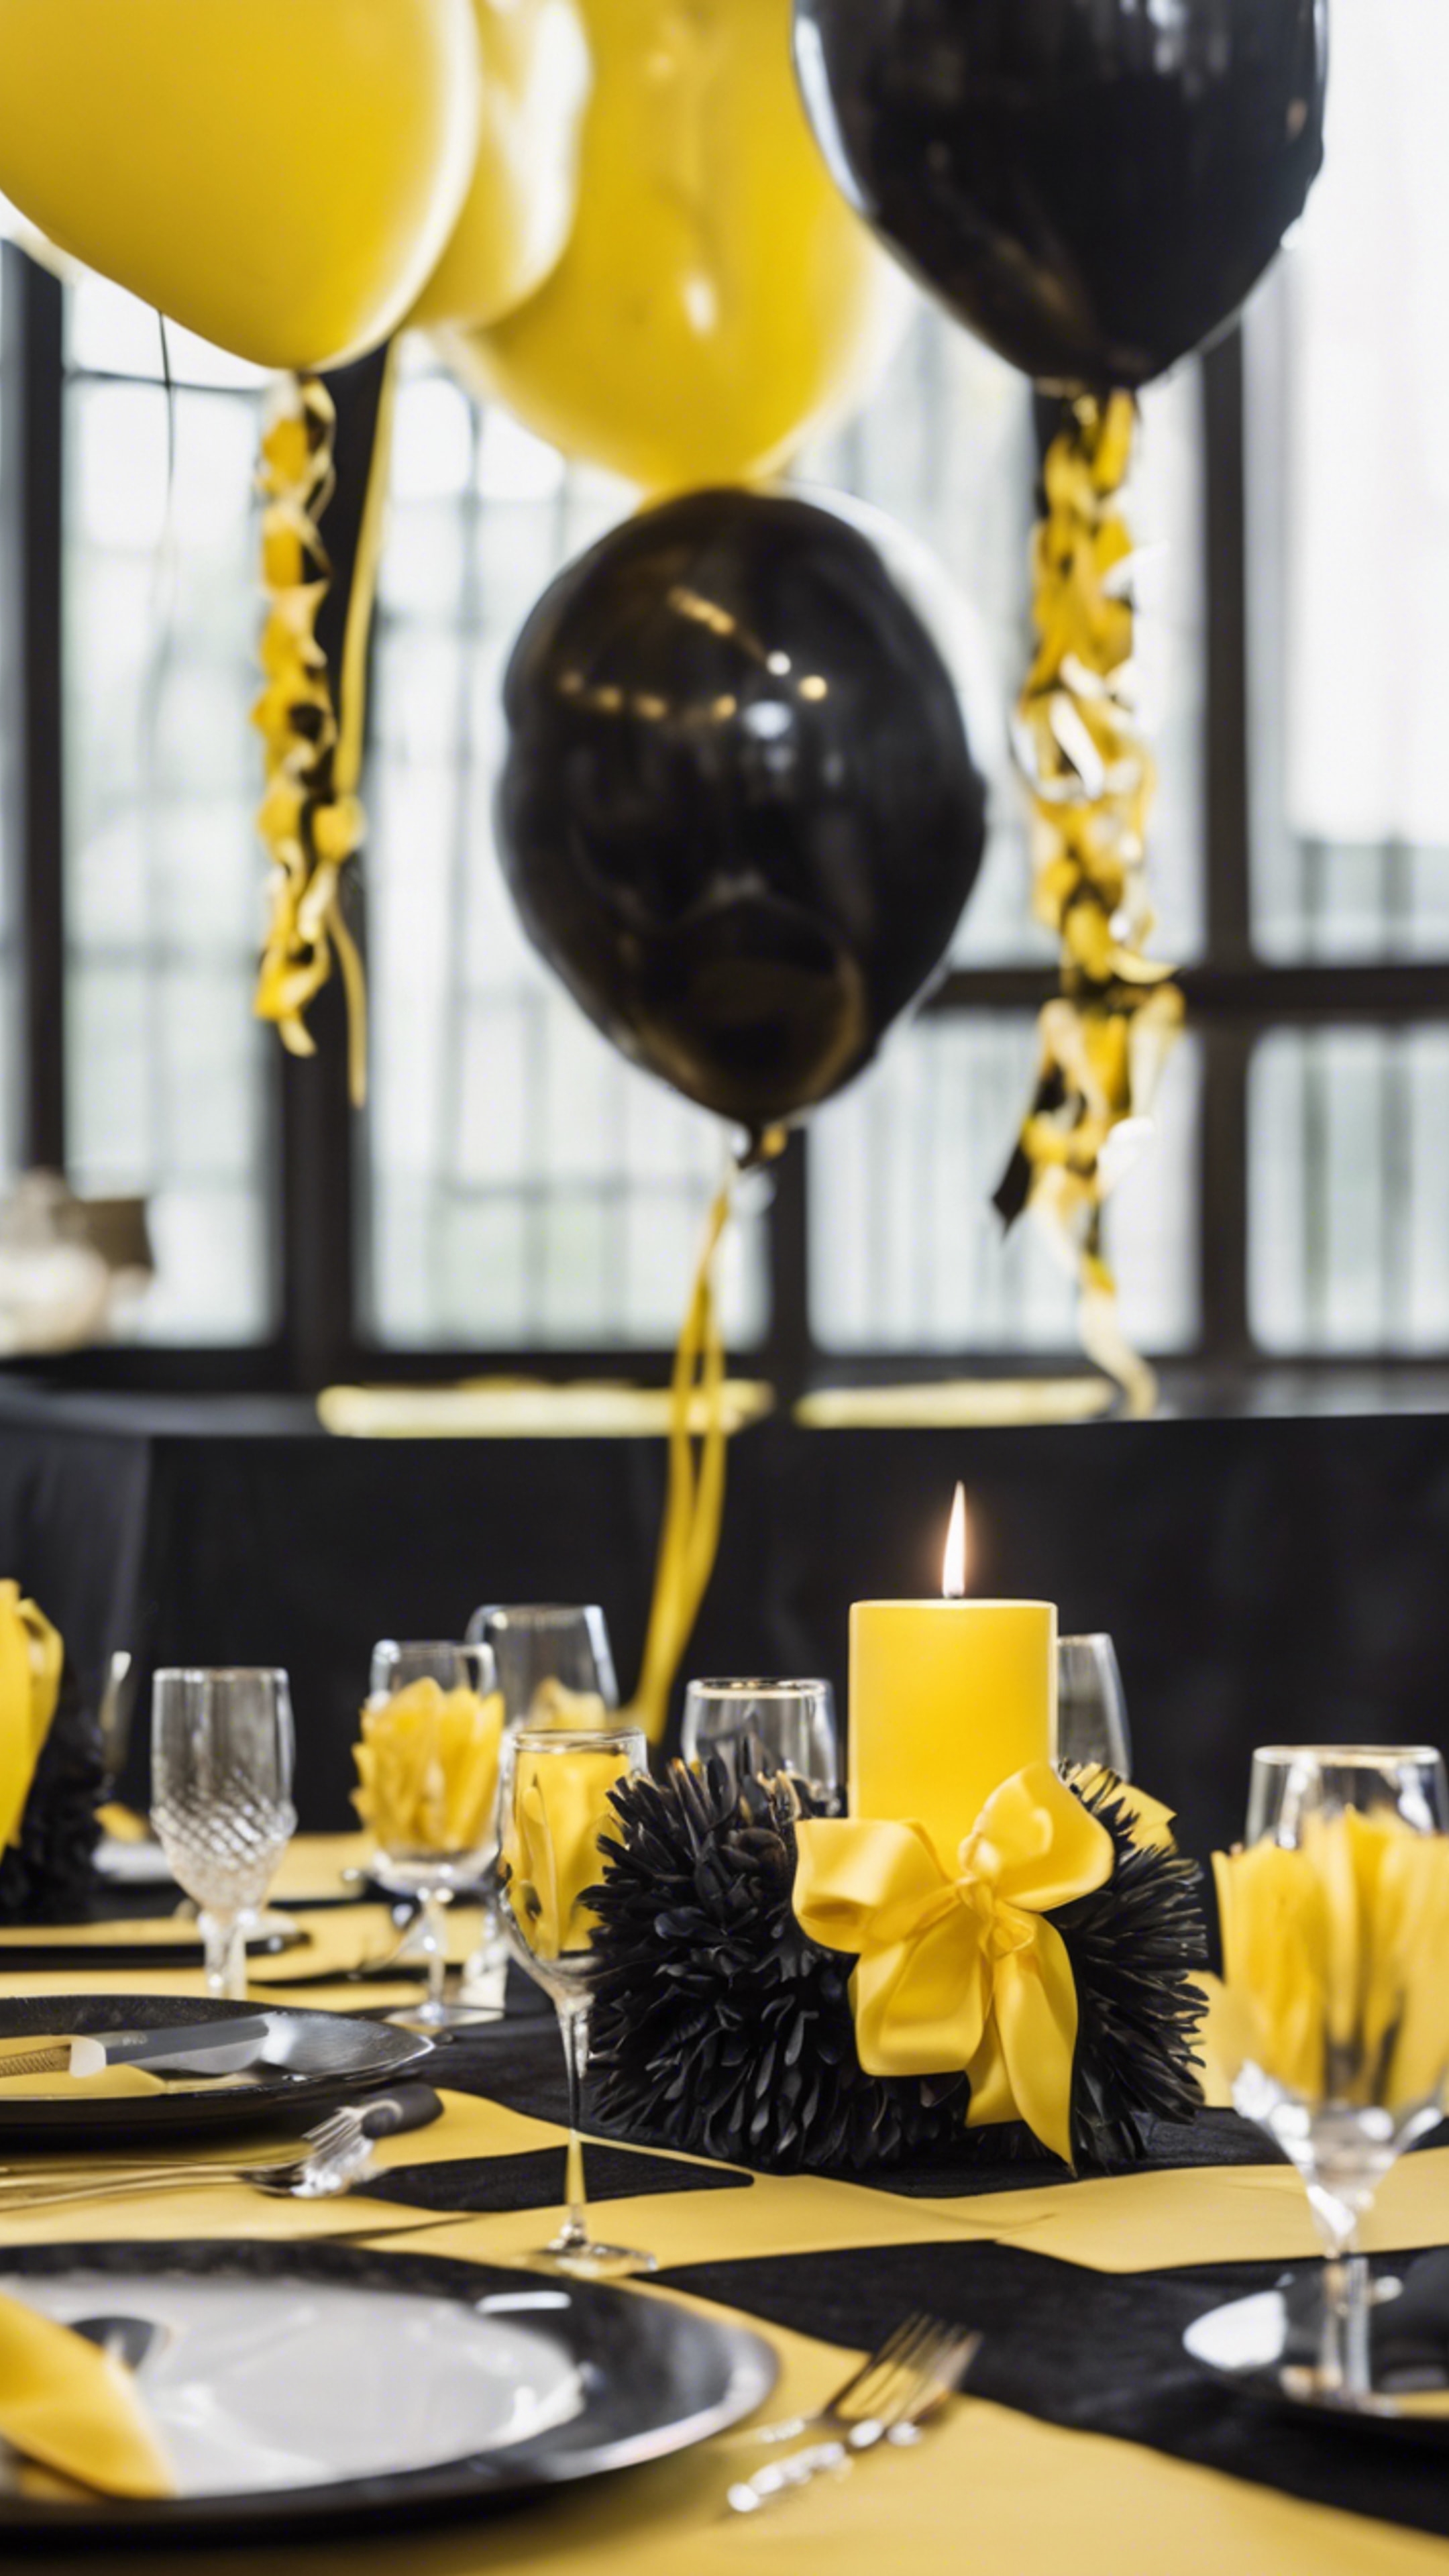 A table set with black and yellow themed party decorations for a birthday celebration. Шпалери[799426b85ea14846a022]